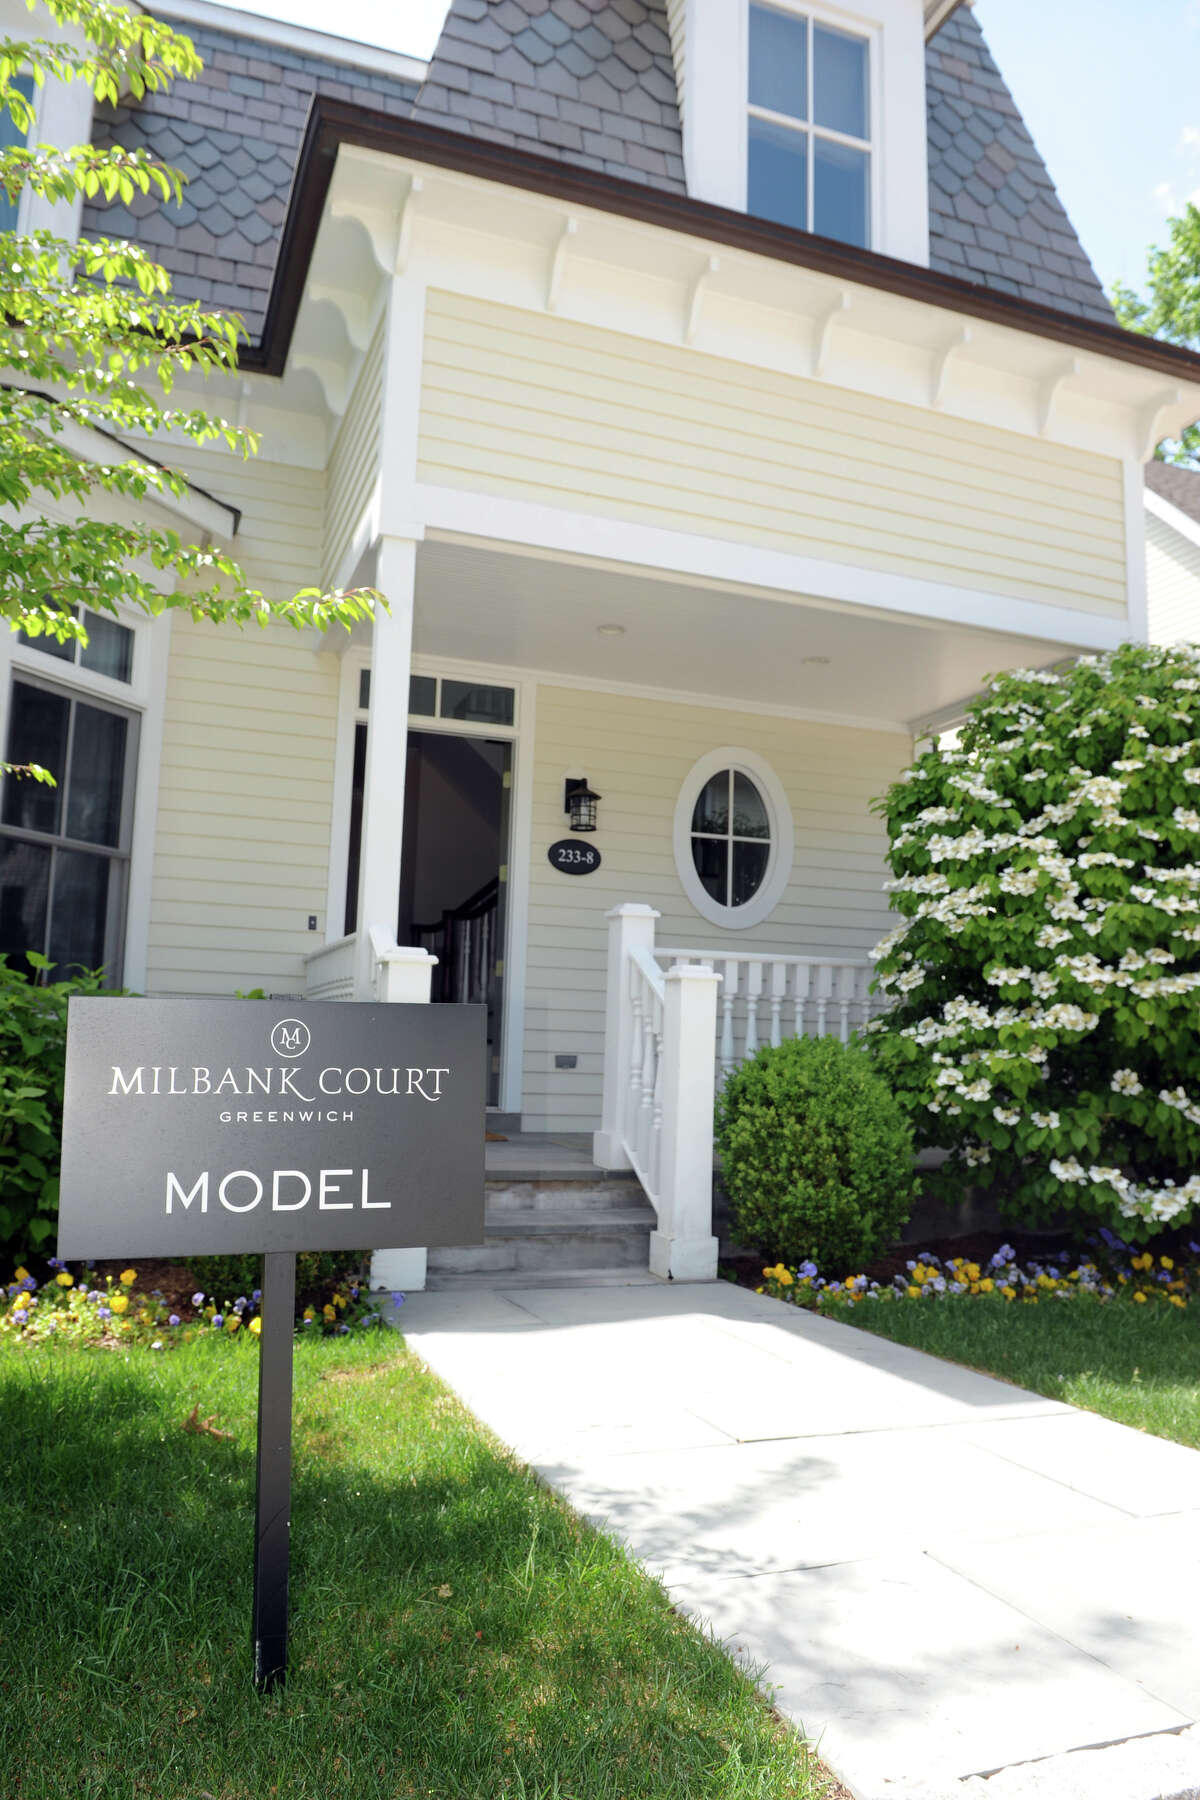 Milbank Court, a new condominium townhome neighborhood in Greenwich, Conn., May 20, 2014.